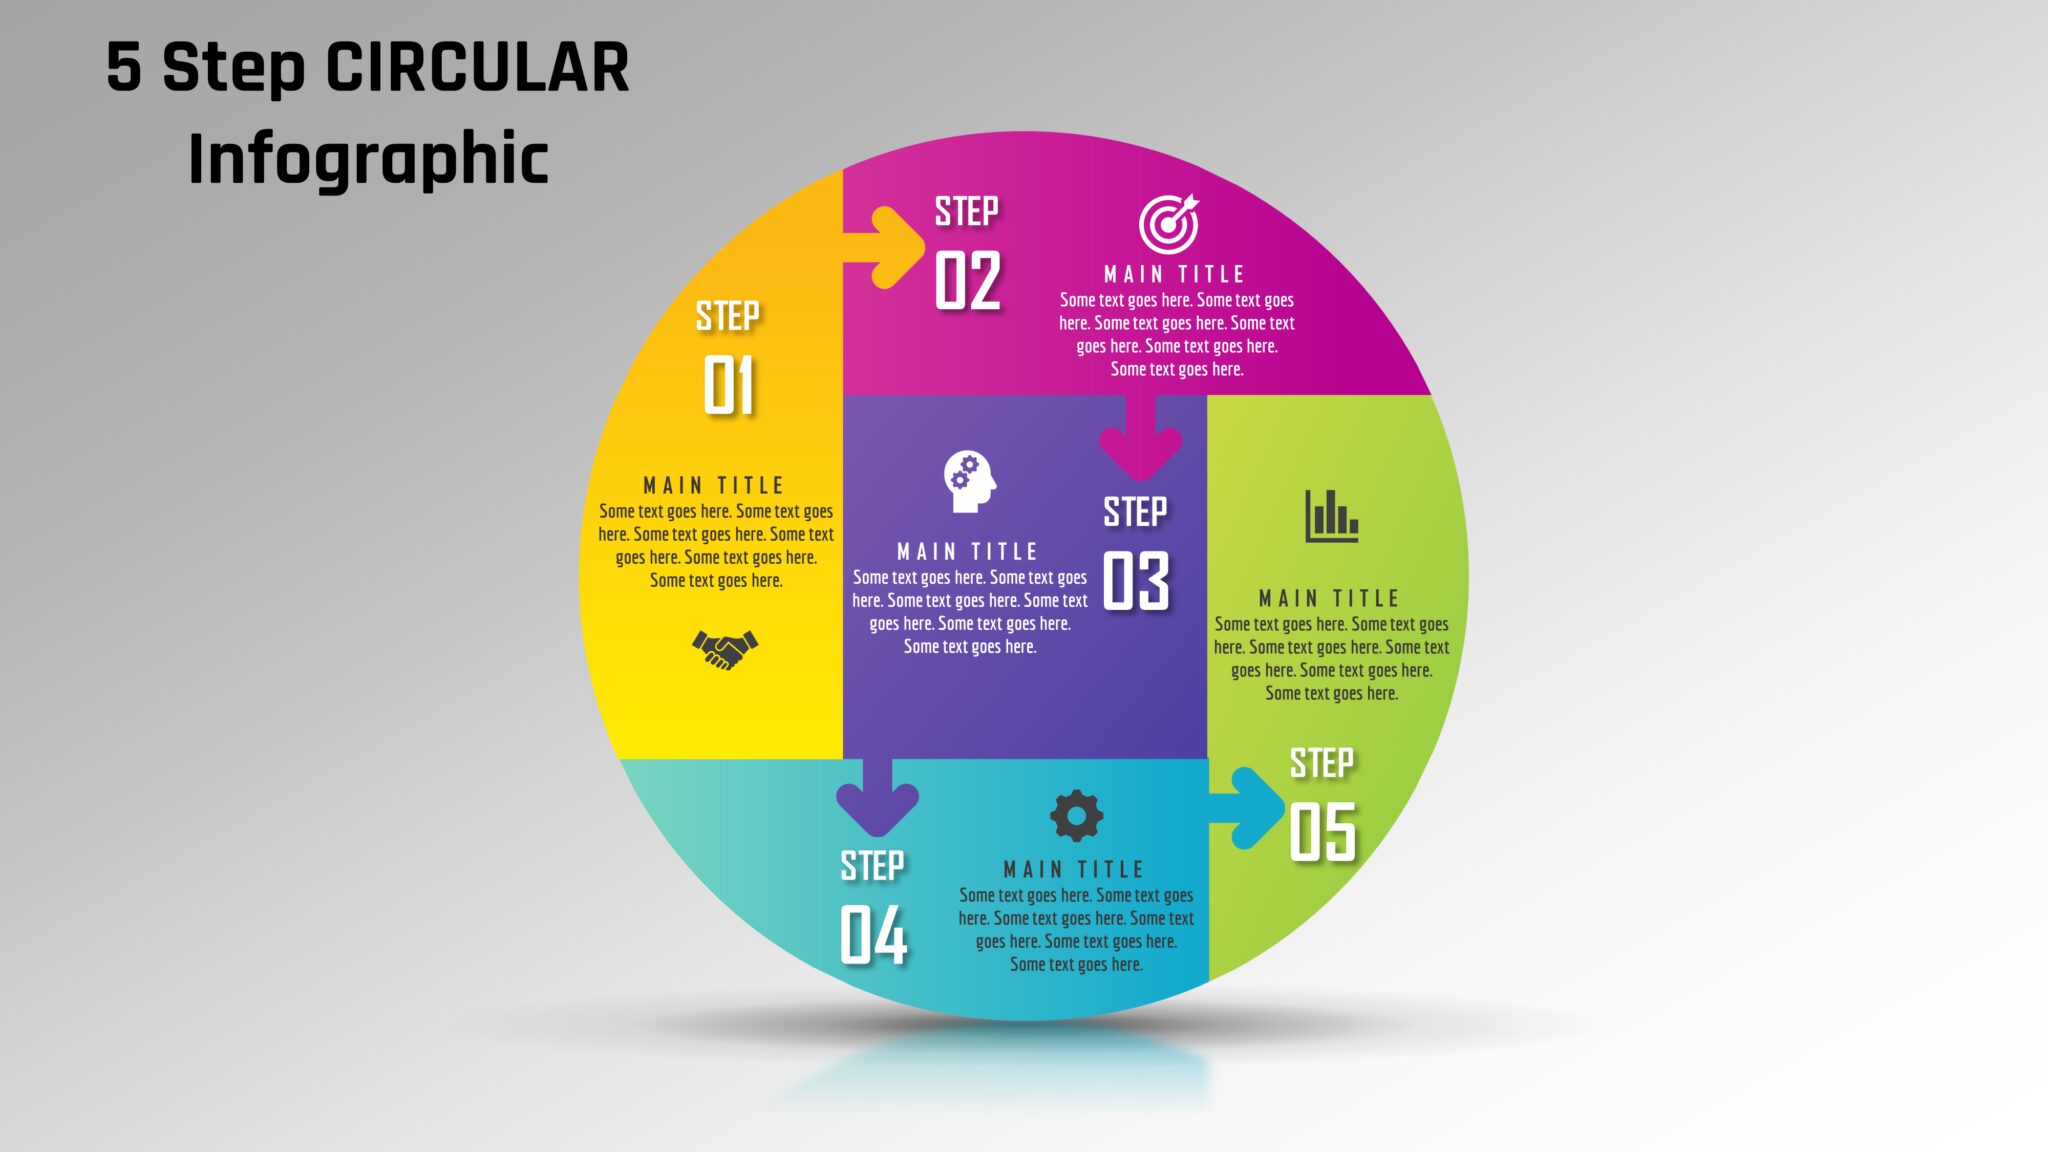 28powerpoint 5 Step Circular Infographic Powerup With Powerpoint 4101